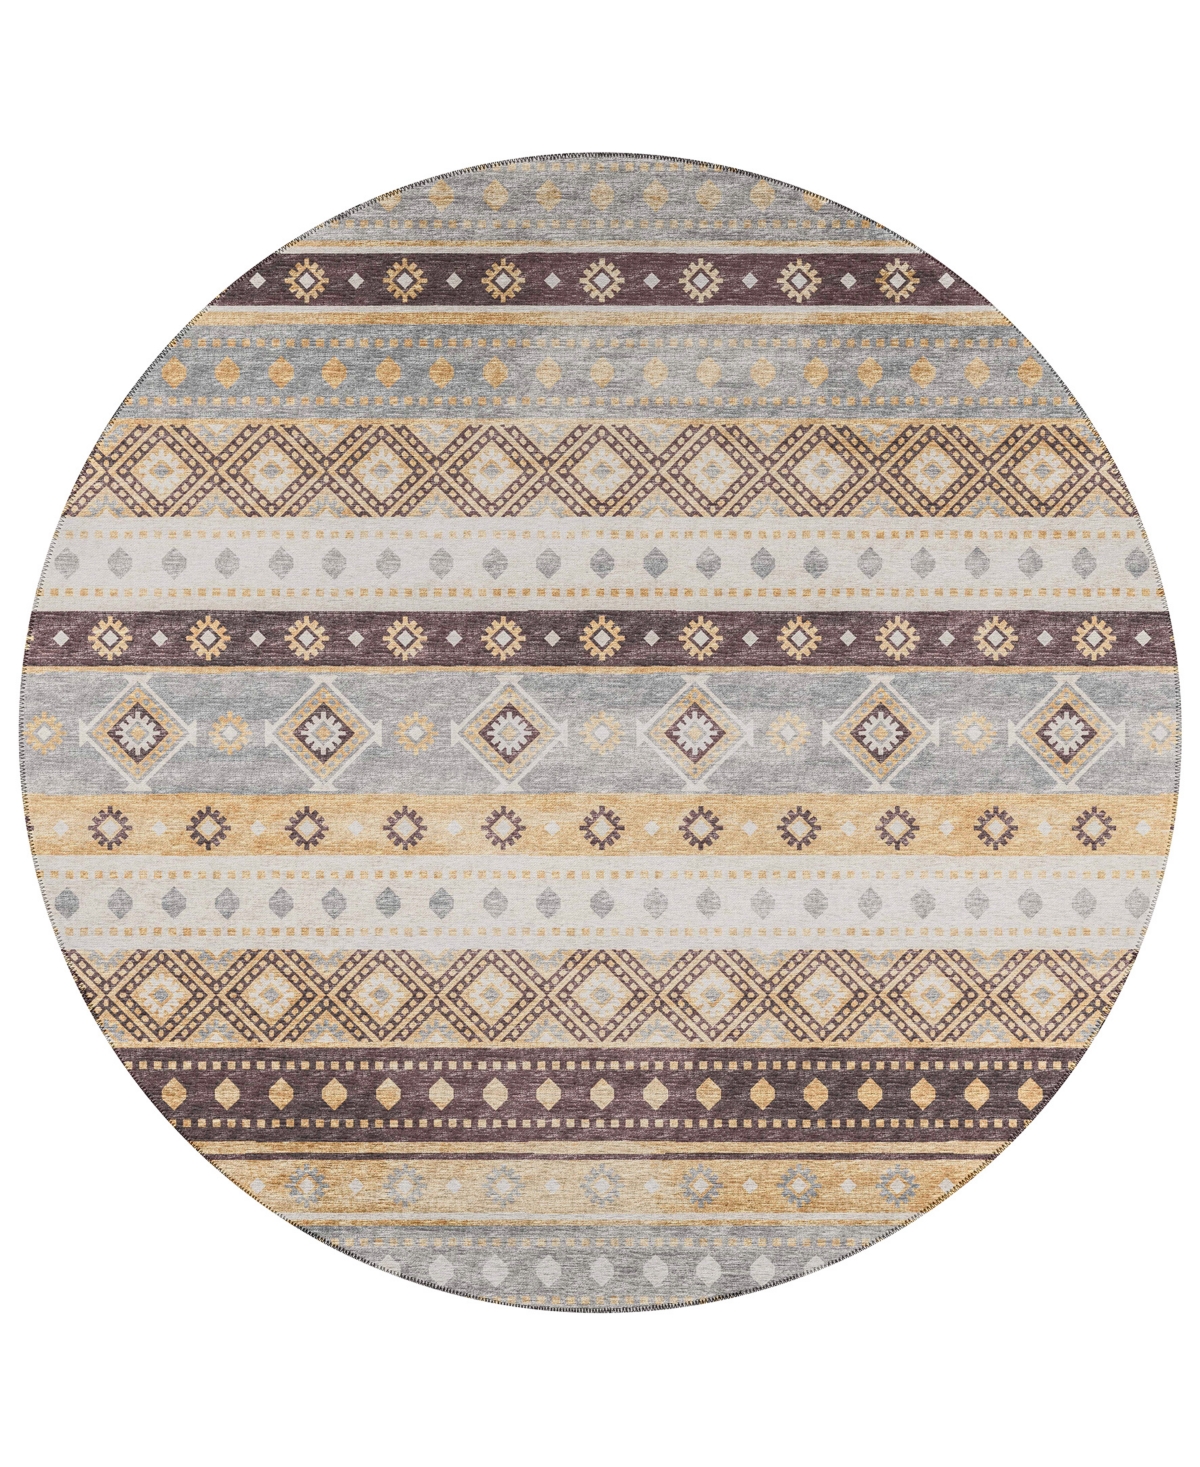 D Style Buttes BTS12 6' x 6' Round Area Rug - Gold Tone